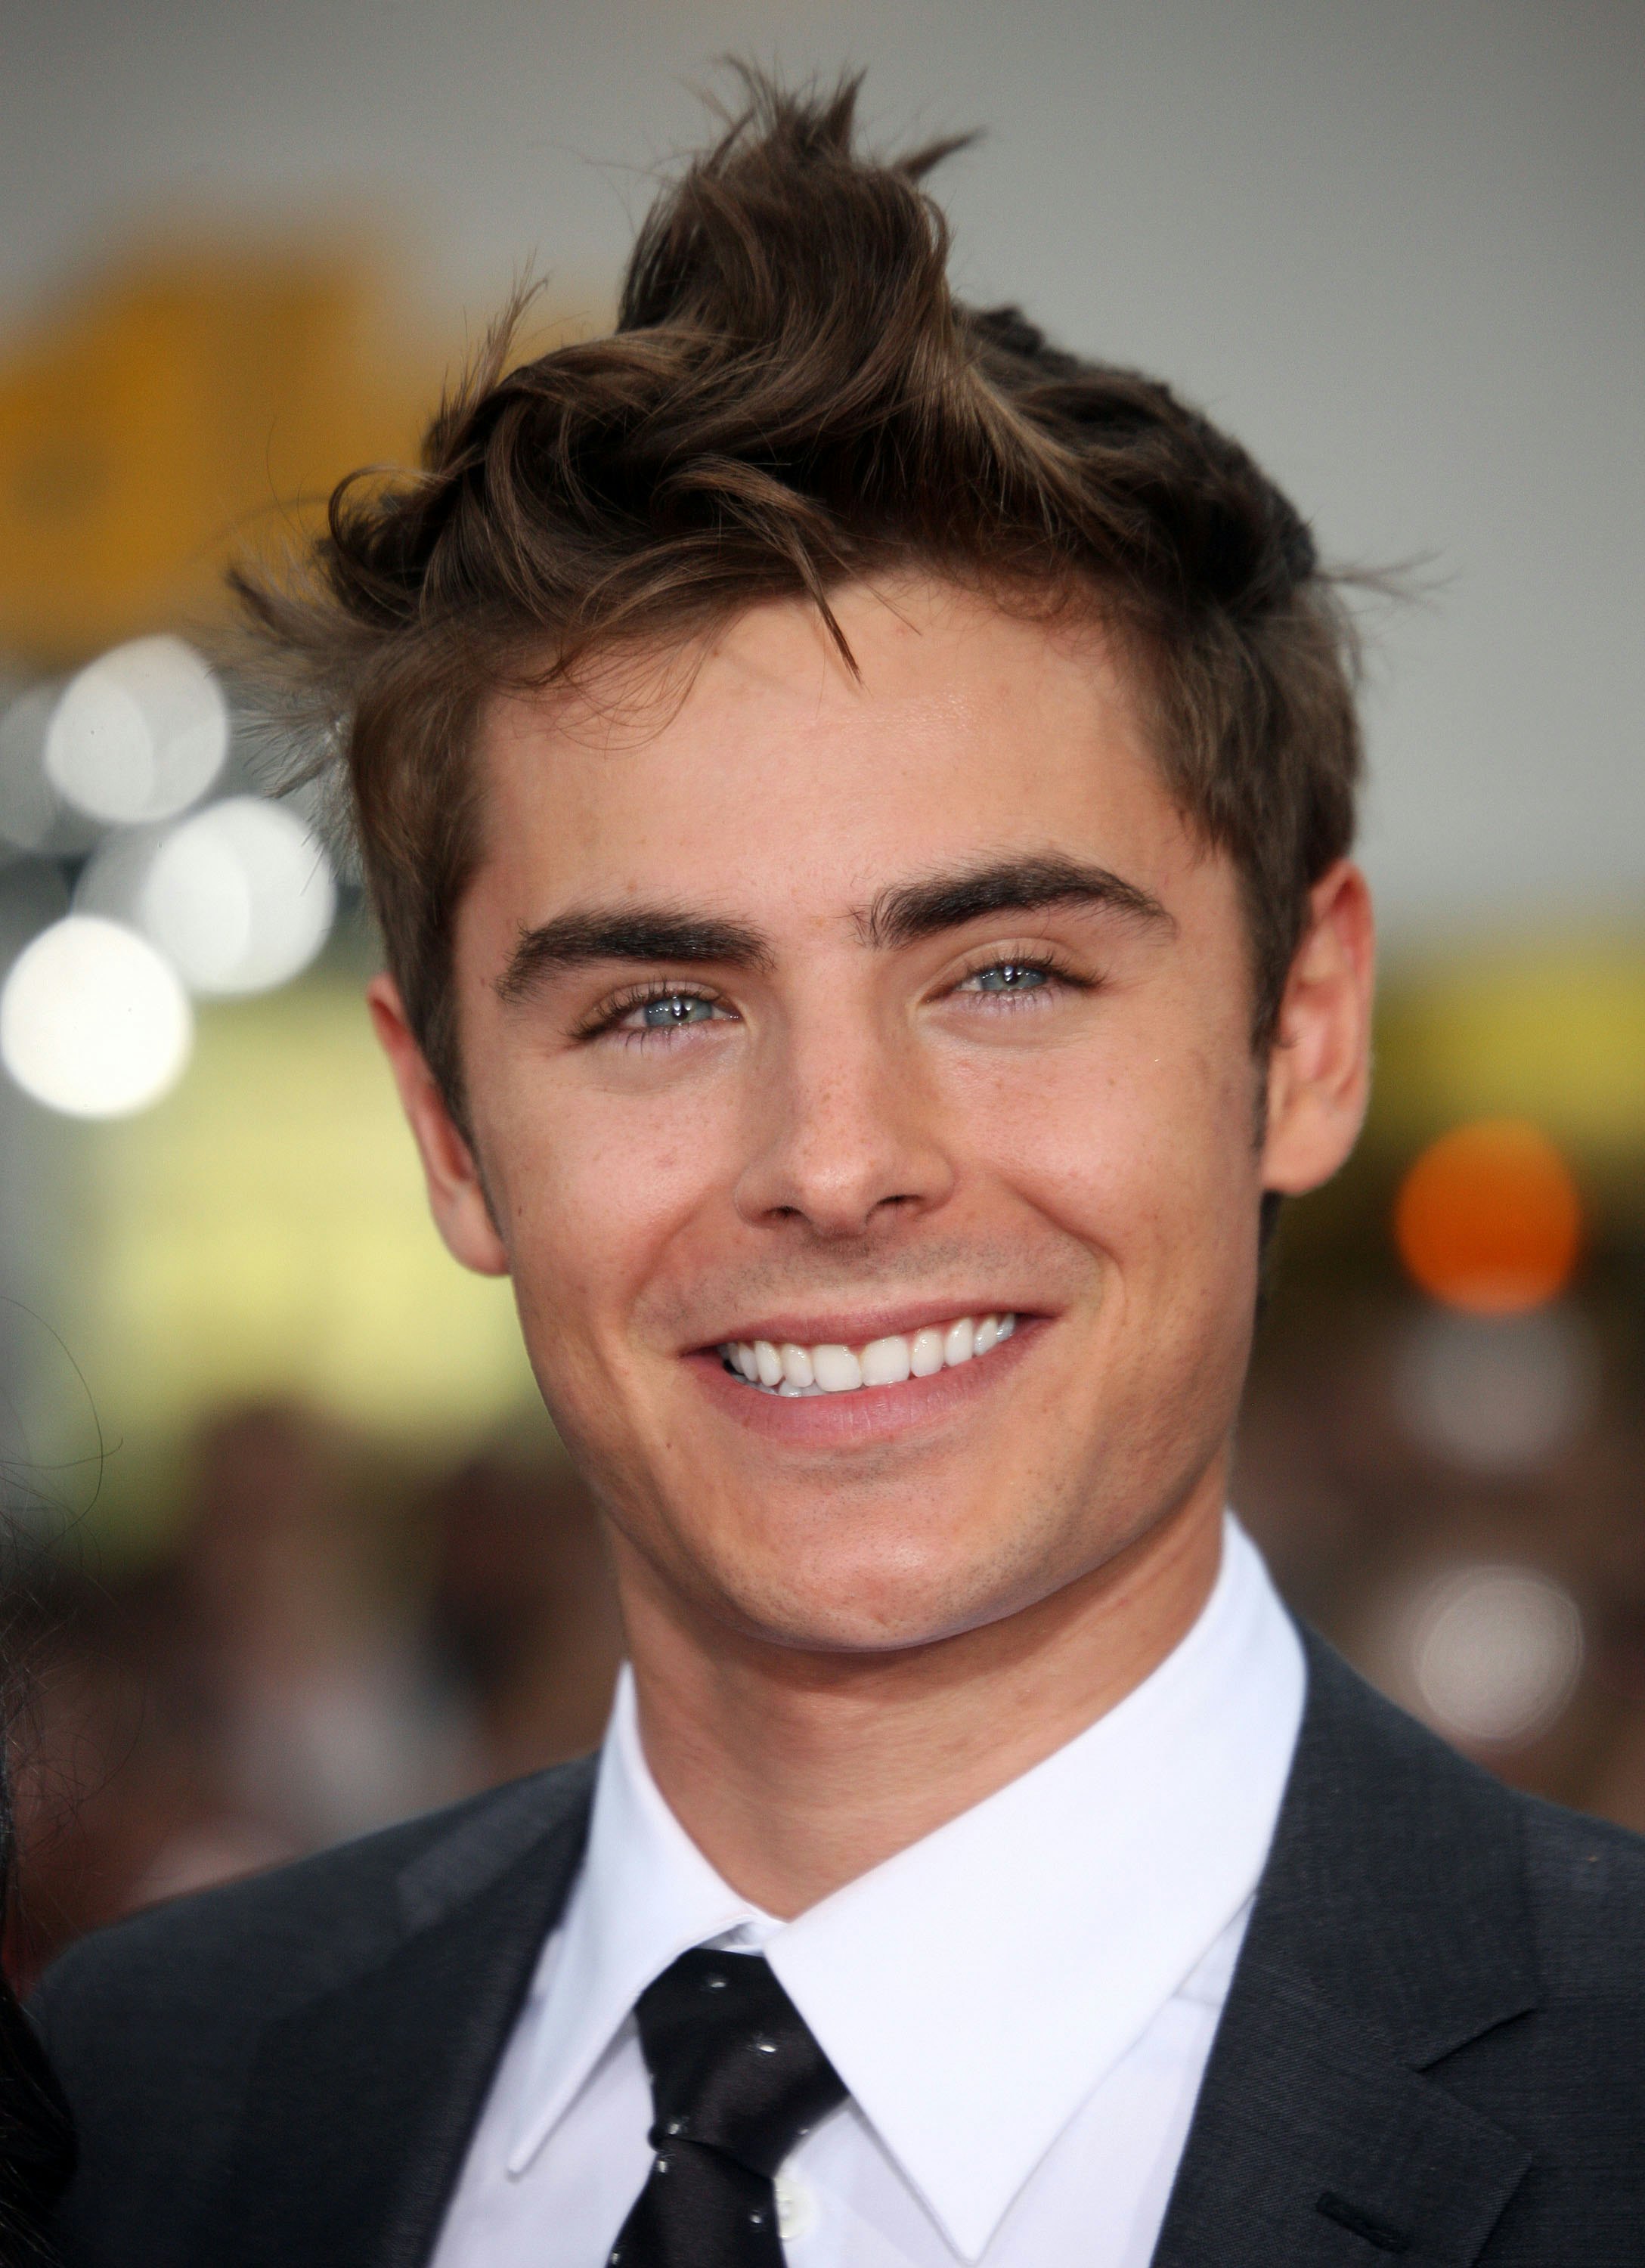 Zac Efron With Crimped Hair Will Bring Back All The 90s Memories